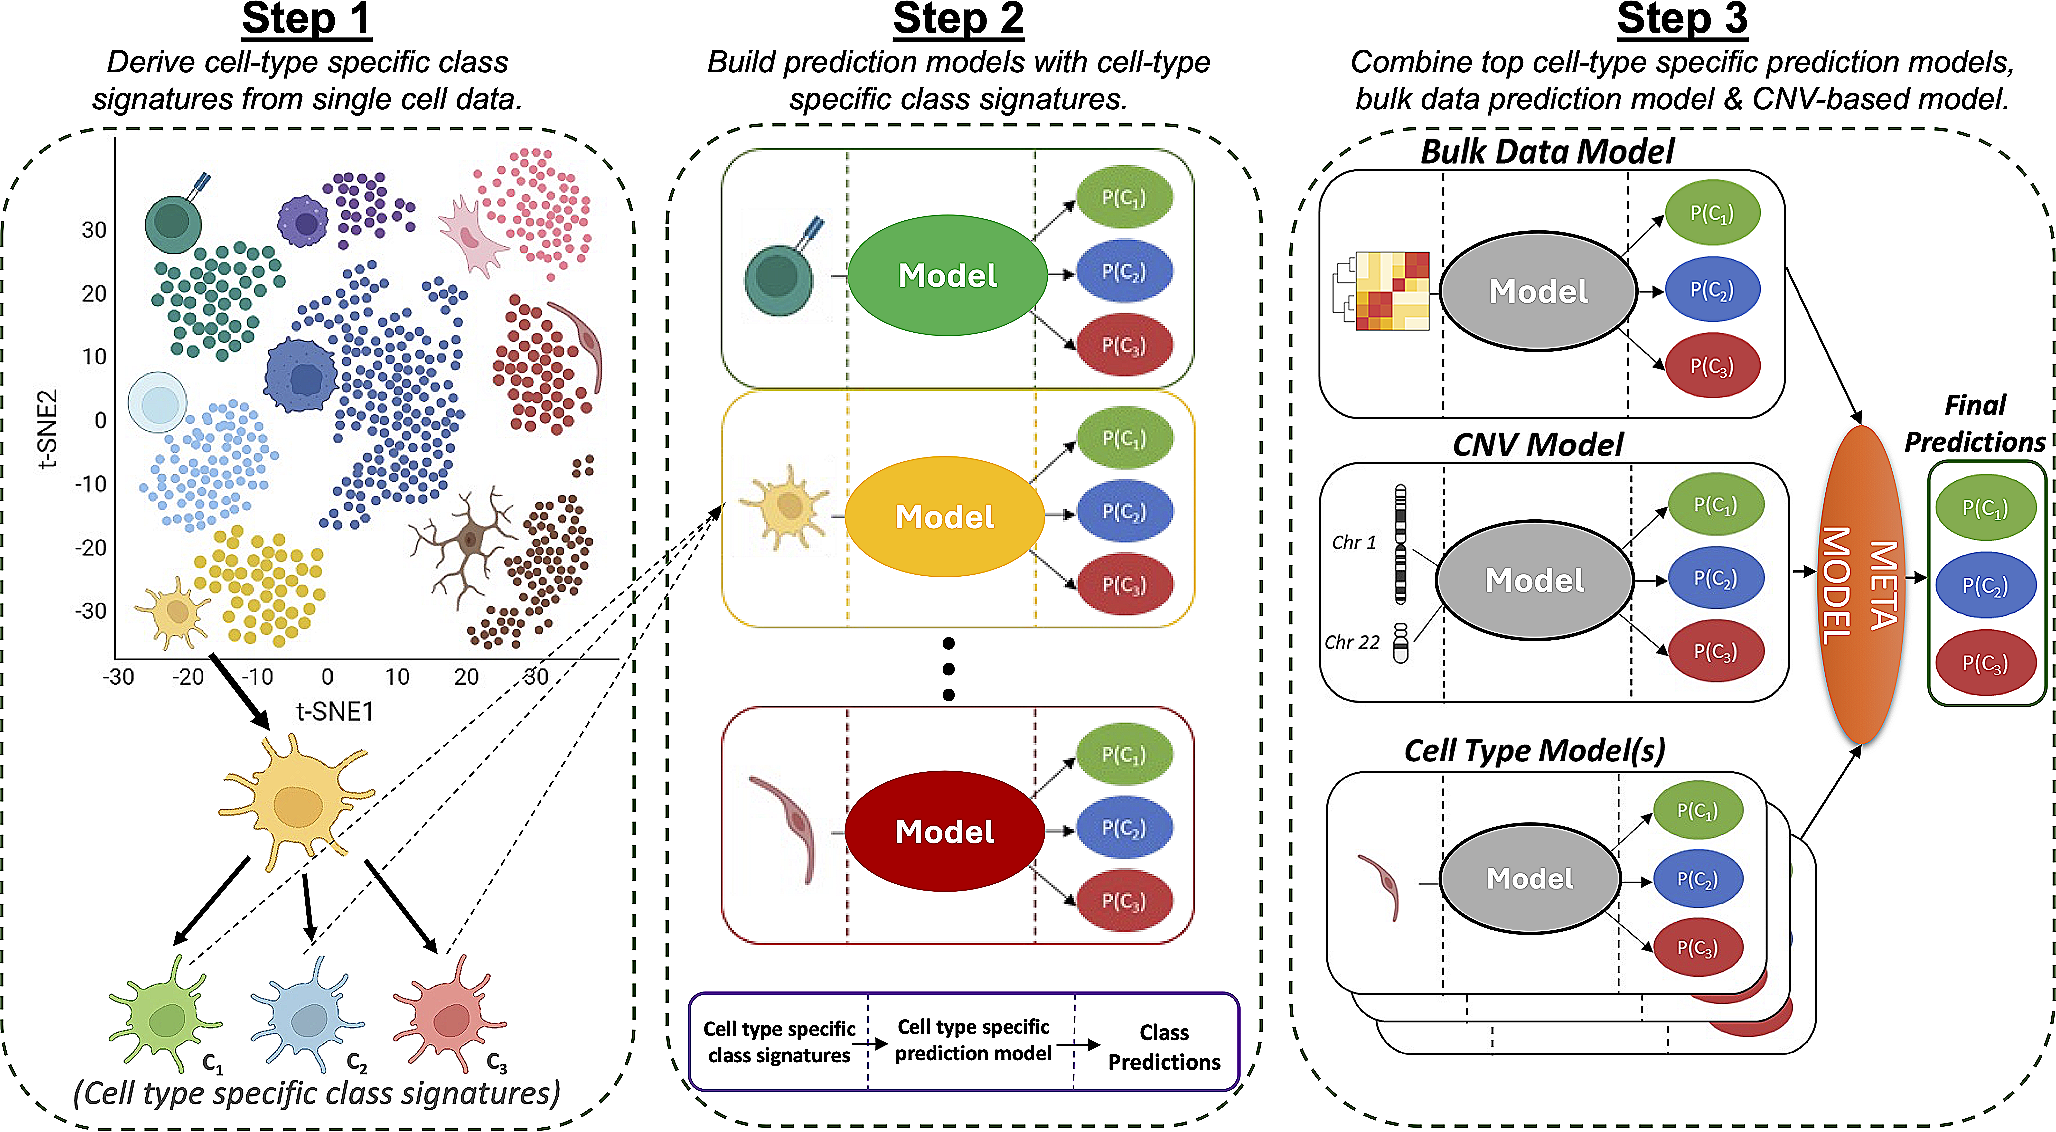 Leveraging single-cell sequencing to classify and characterize tumor subgroups in bulk RNA-sequencing data